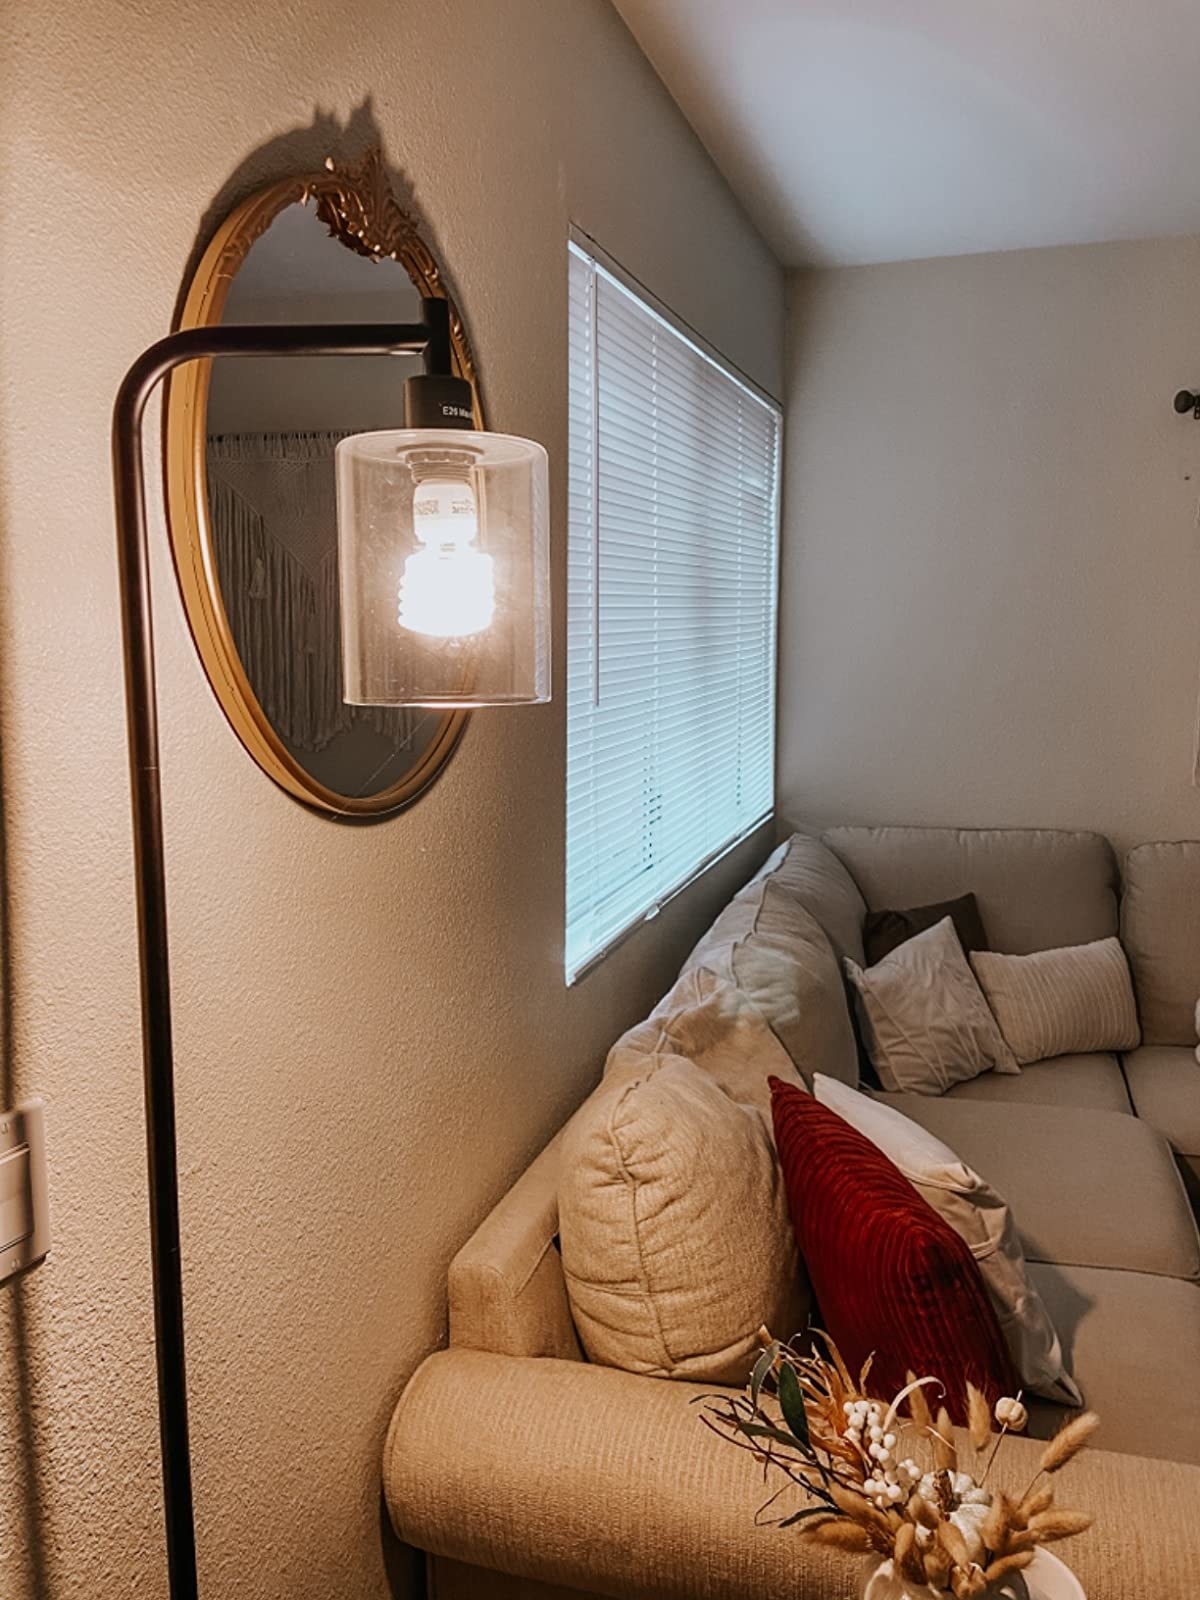 Industrial pendant floor lamp next to couch